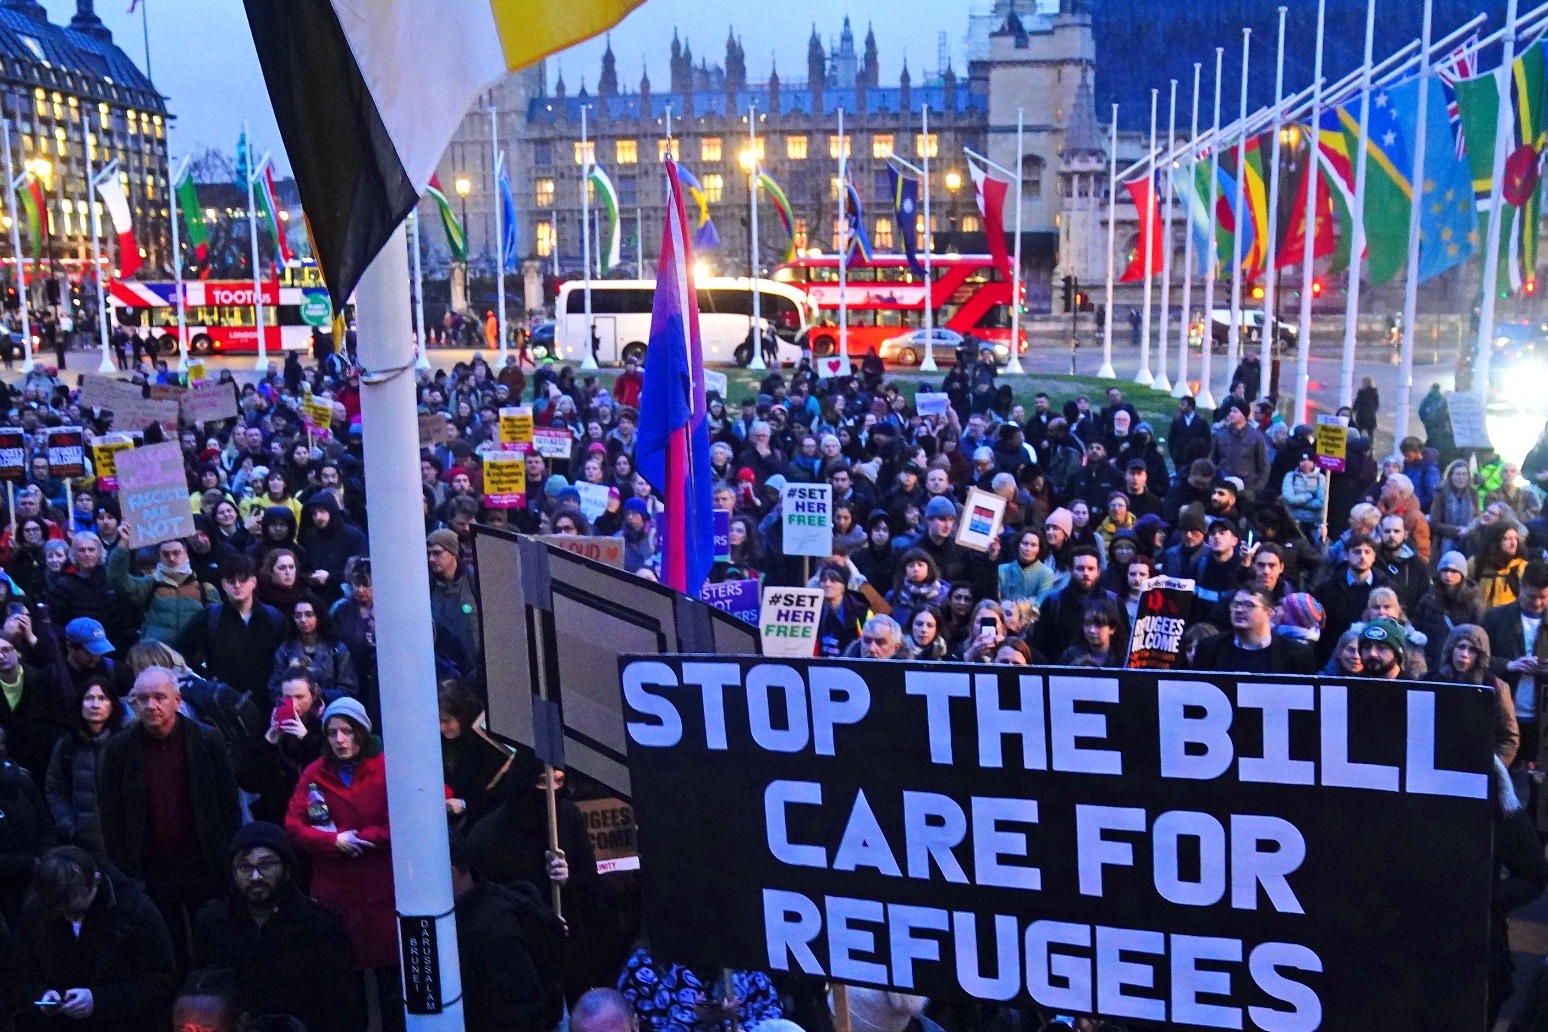 More than 300 experts sign letter against Government’s ‘unworkable’ migrant Bill 